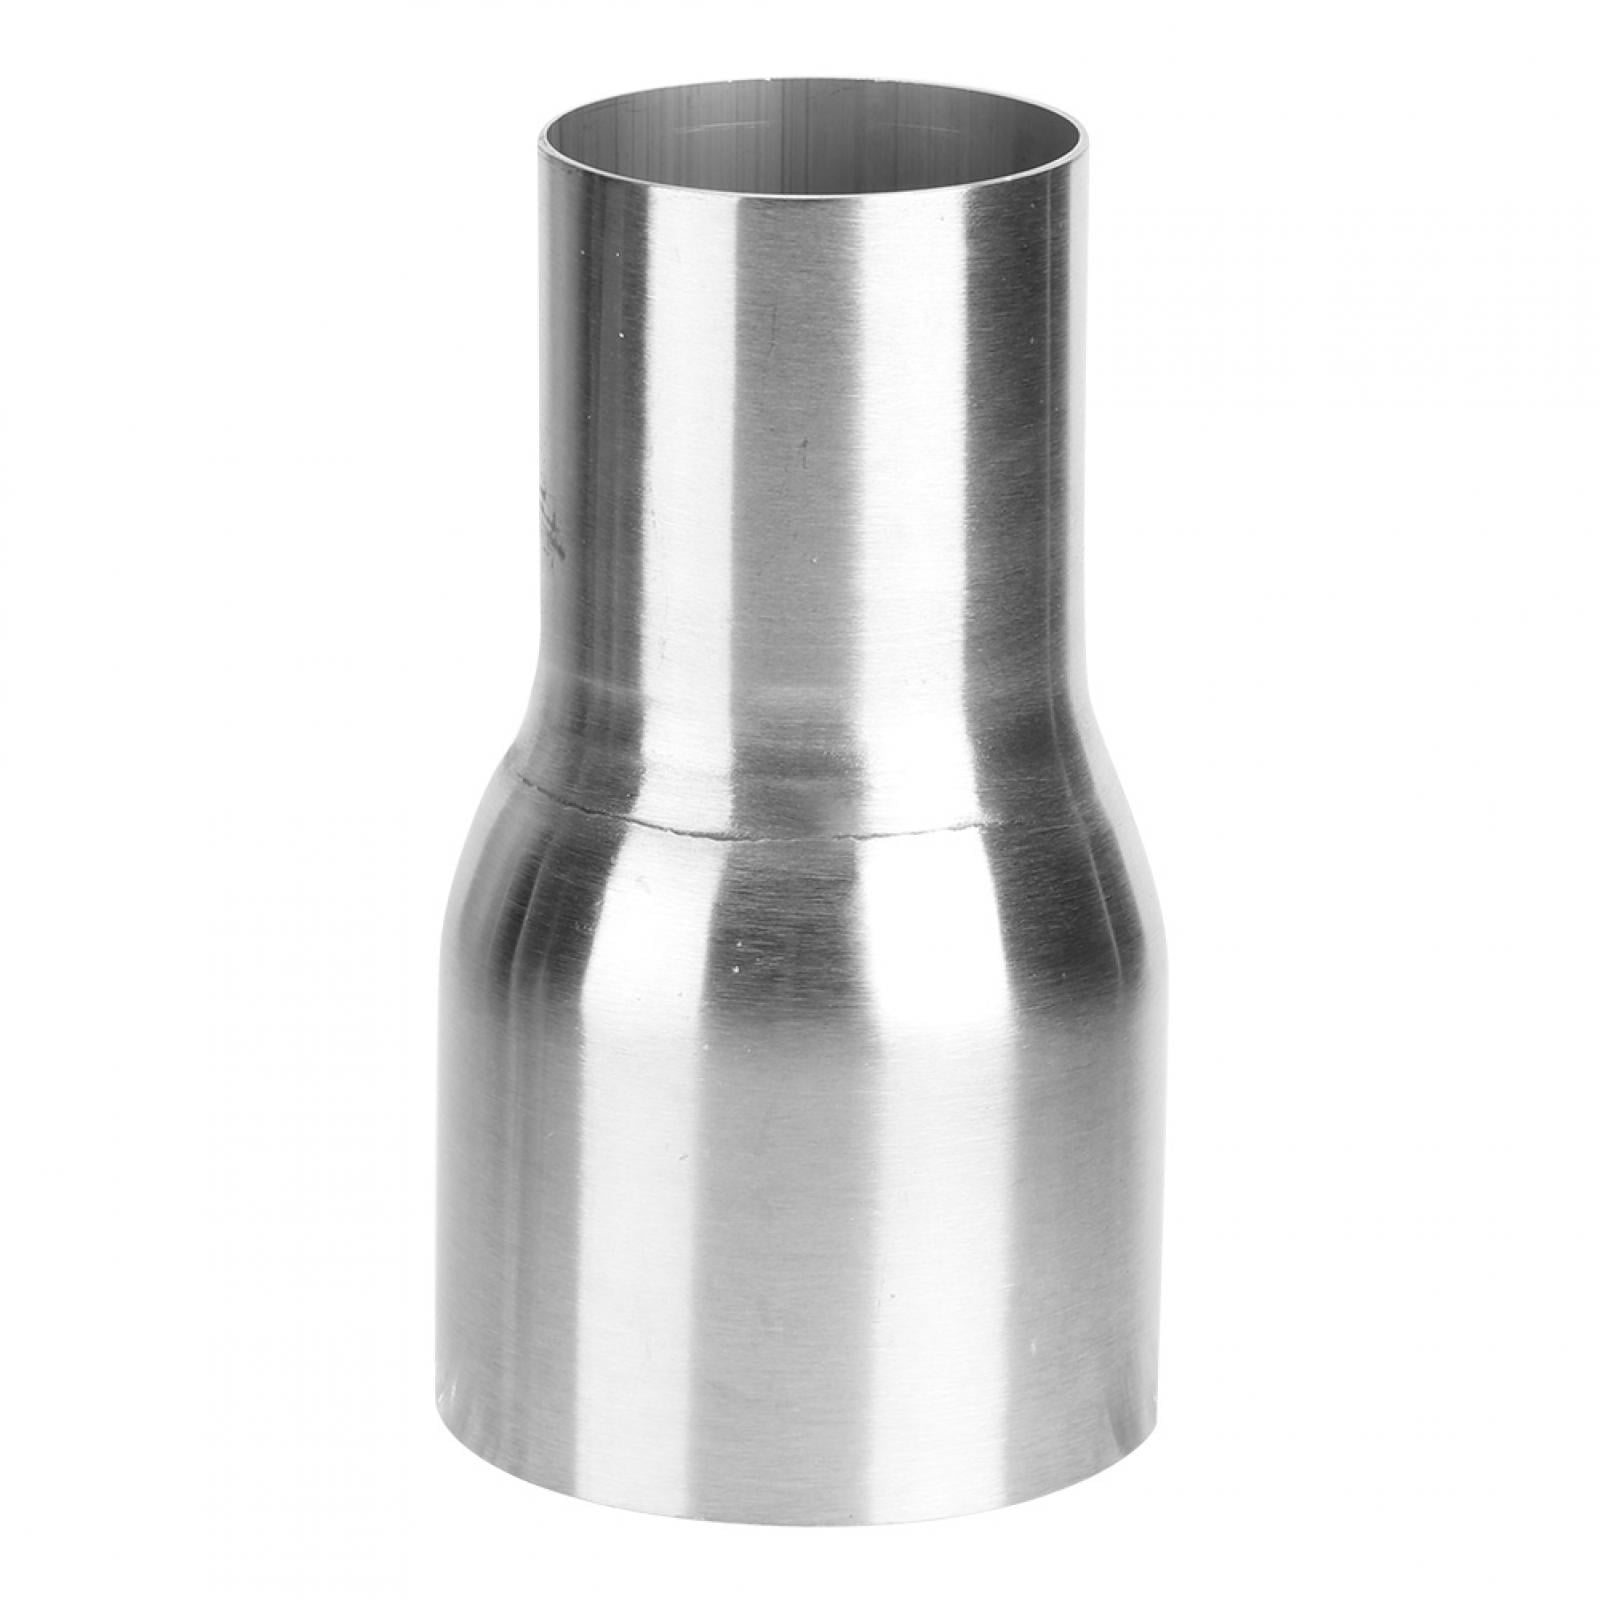 Exhaust Pipe Adapter,Universal Stainless Steel Exhaust Pipe Connector Tube Adapter Reducer Modified Part 63-76MM 